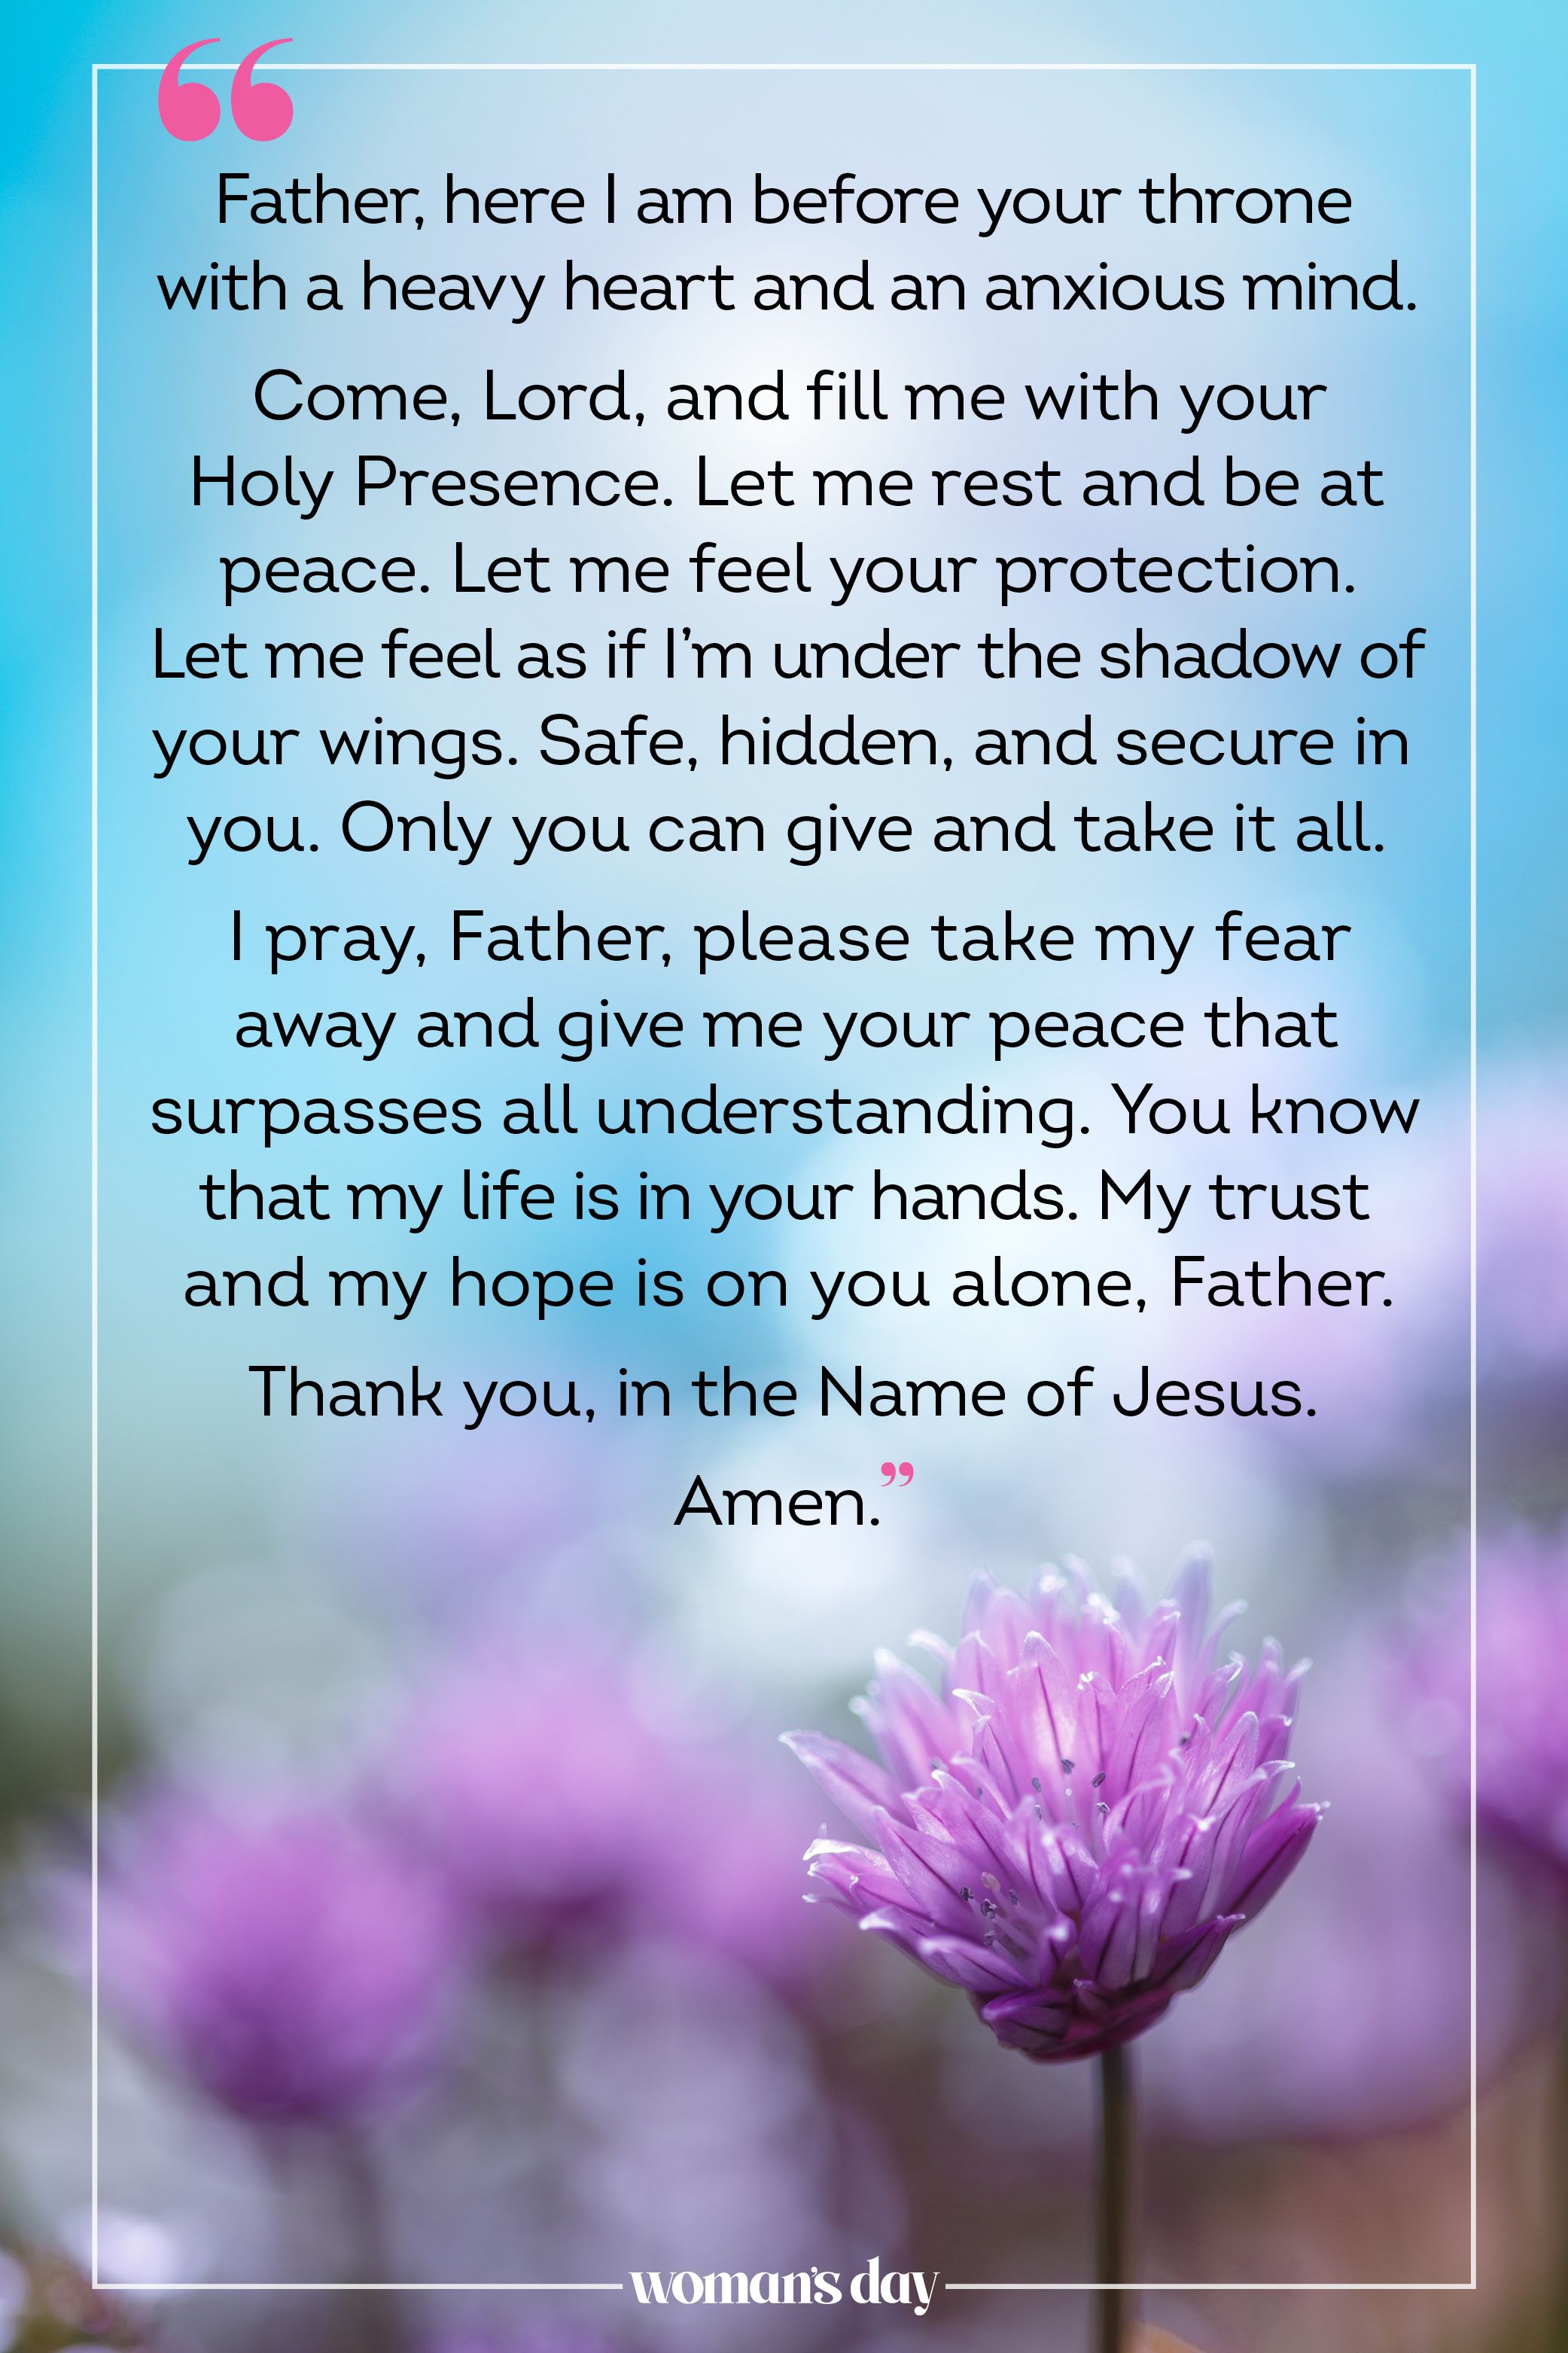 Morning Prayer Images and Quotes to Start Your Day Right